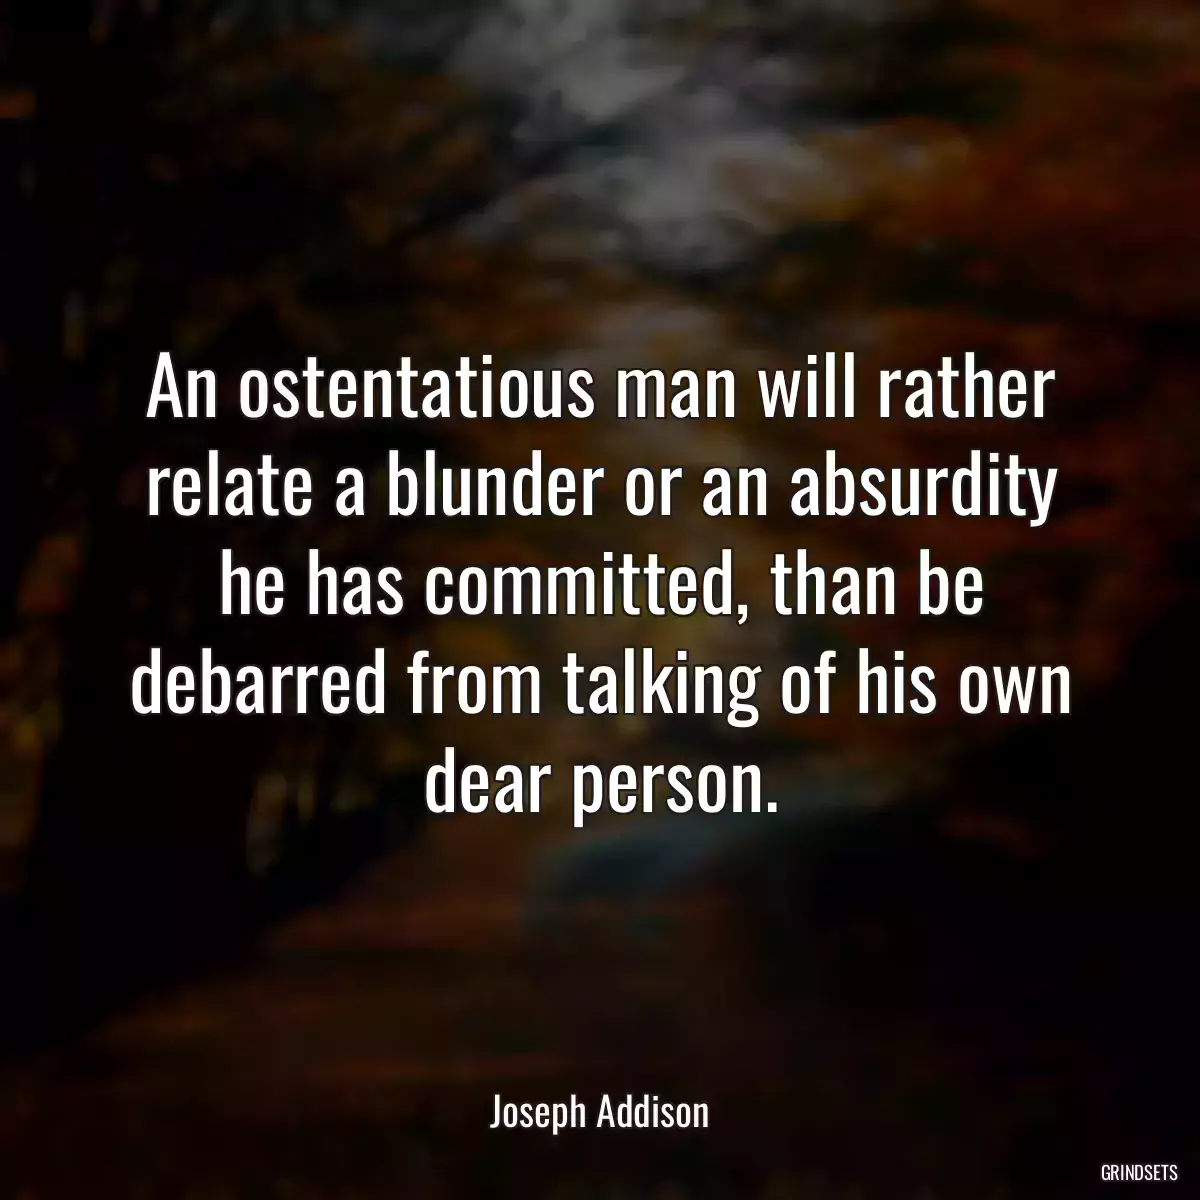 An ostentatious man will rather relate a blunder or an absurdity he has committed, than be debarred from talking of his own dear person.